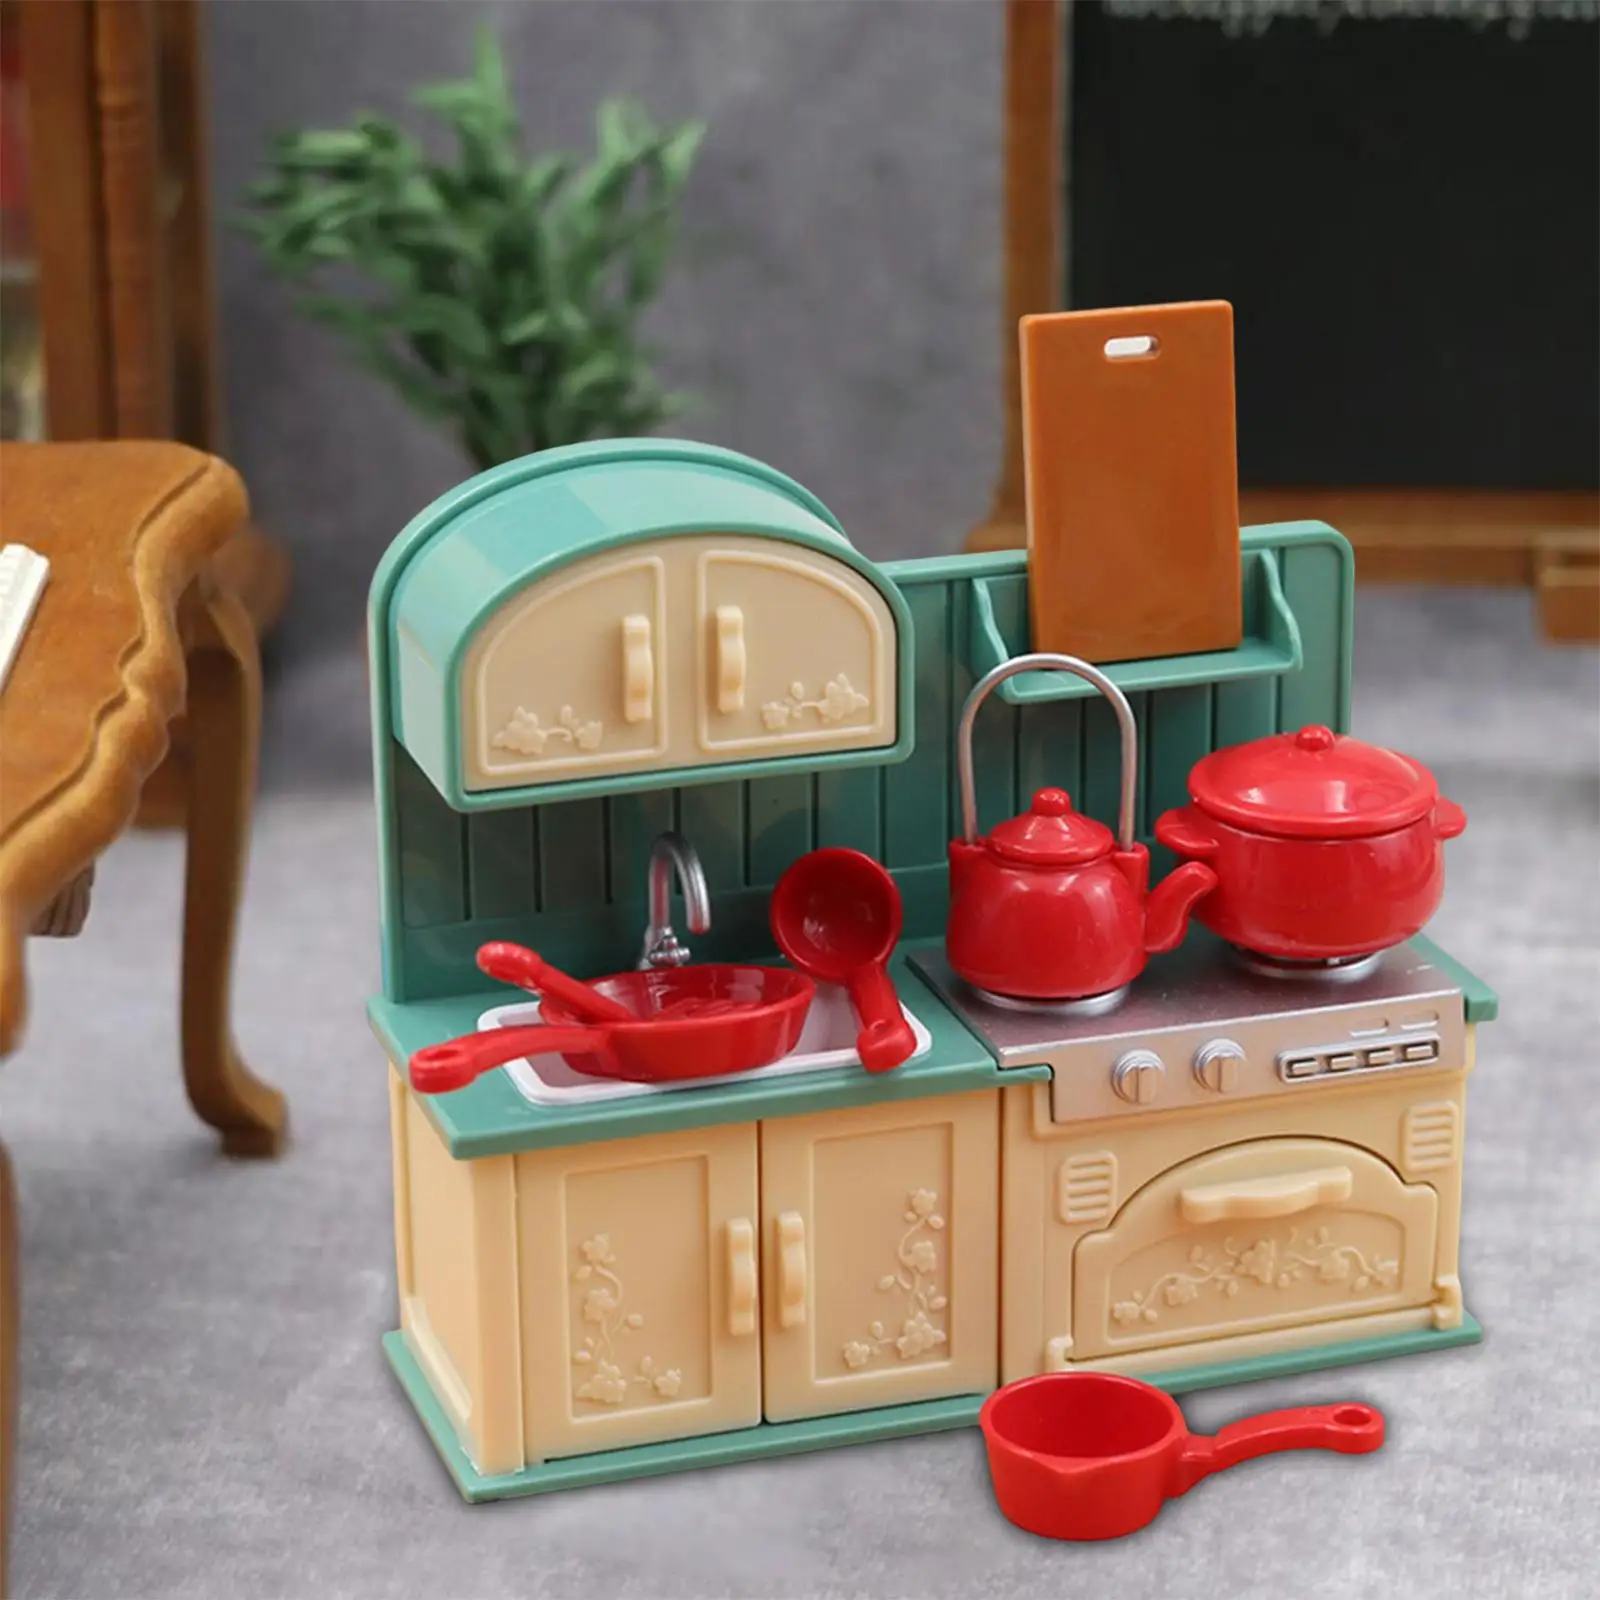 1/18 Dollhouse Play Set and Accessory Accessories Dollhouse Decor Pretend Play Miniature Dollhouse Furniture for Presents